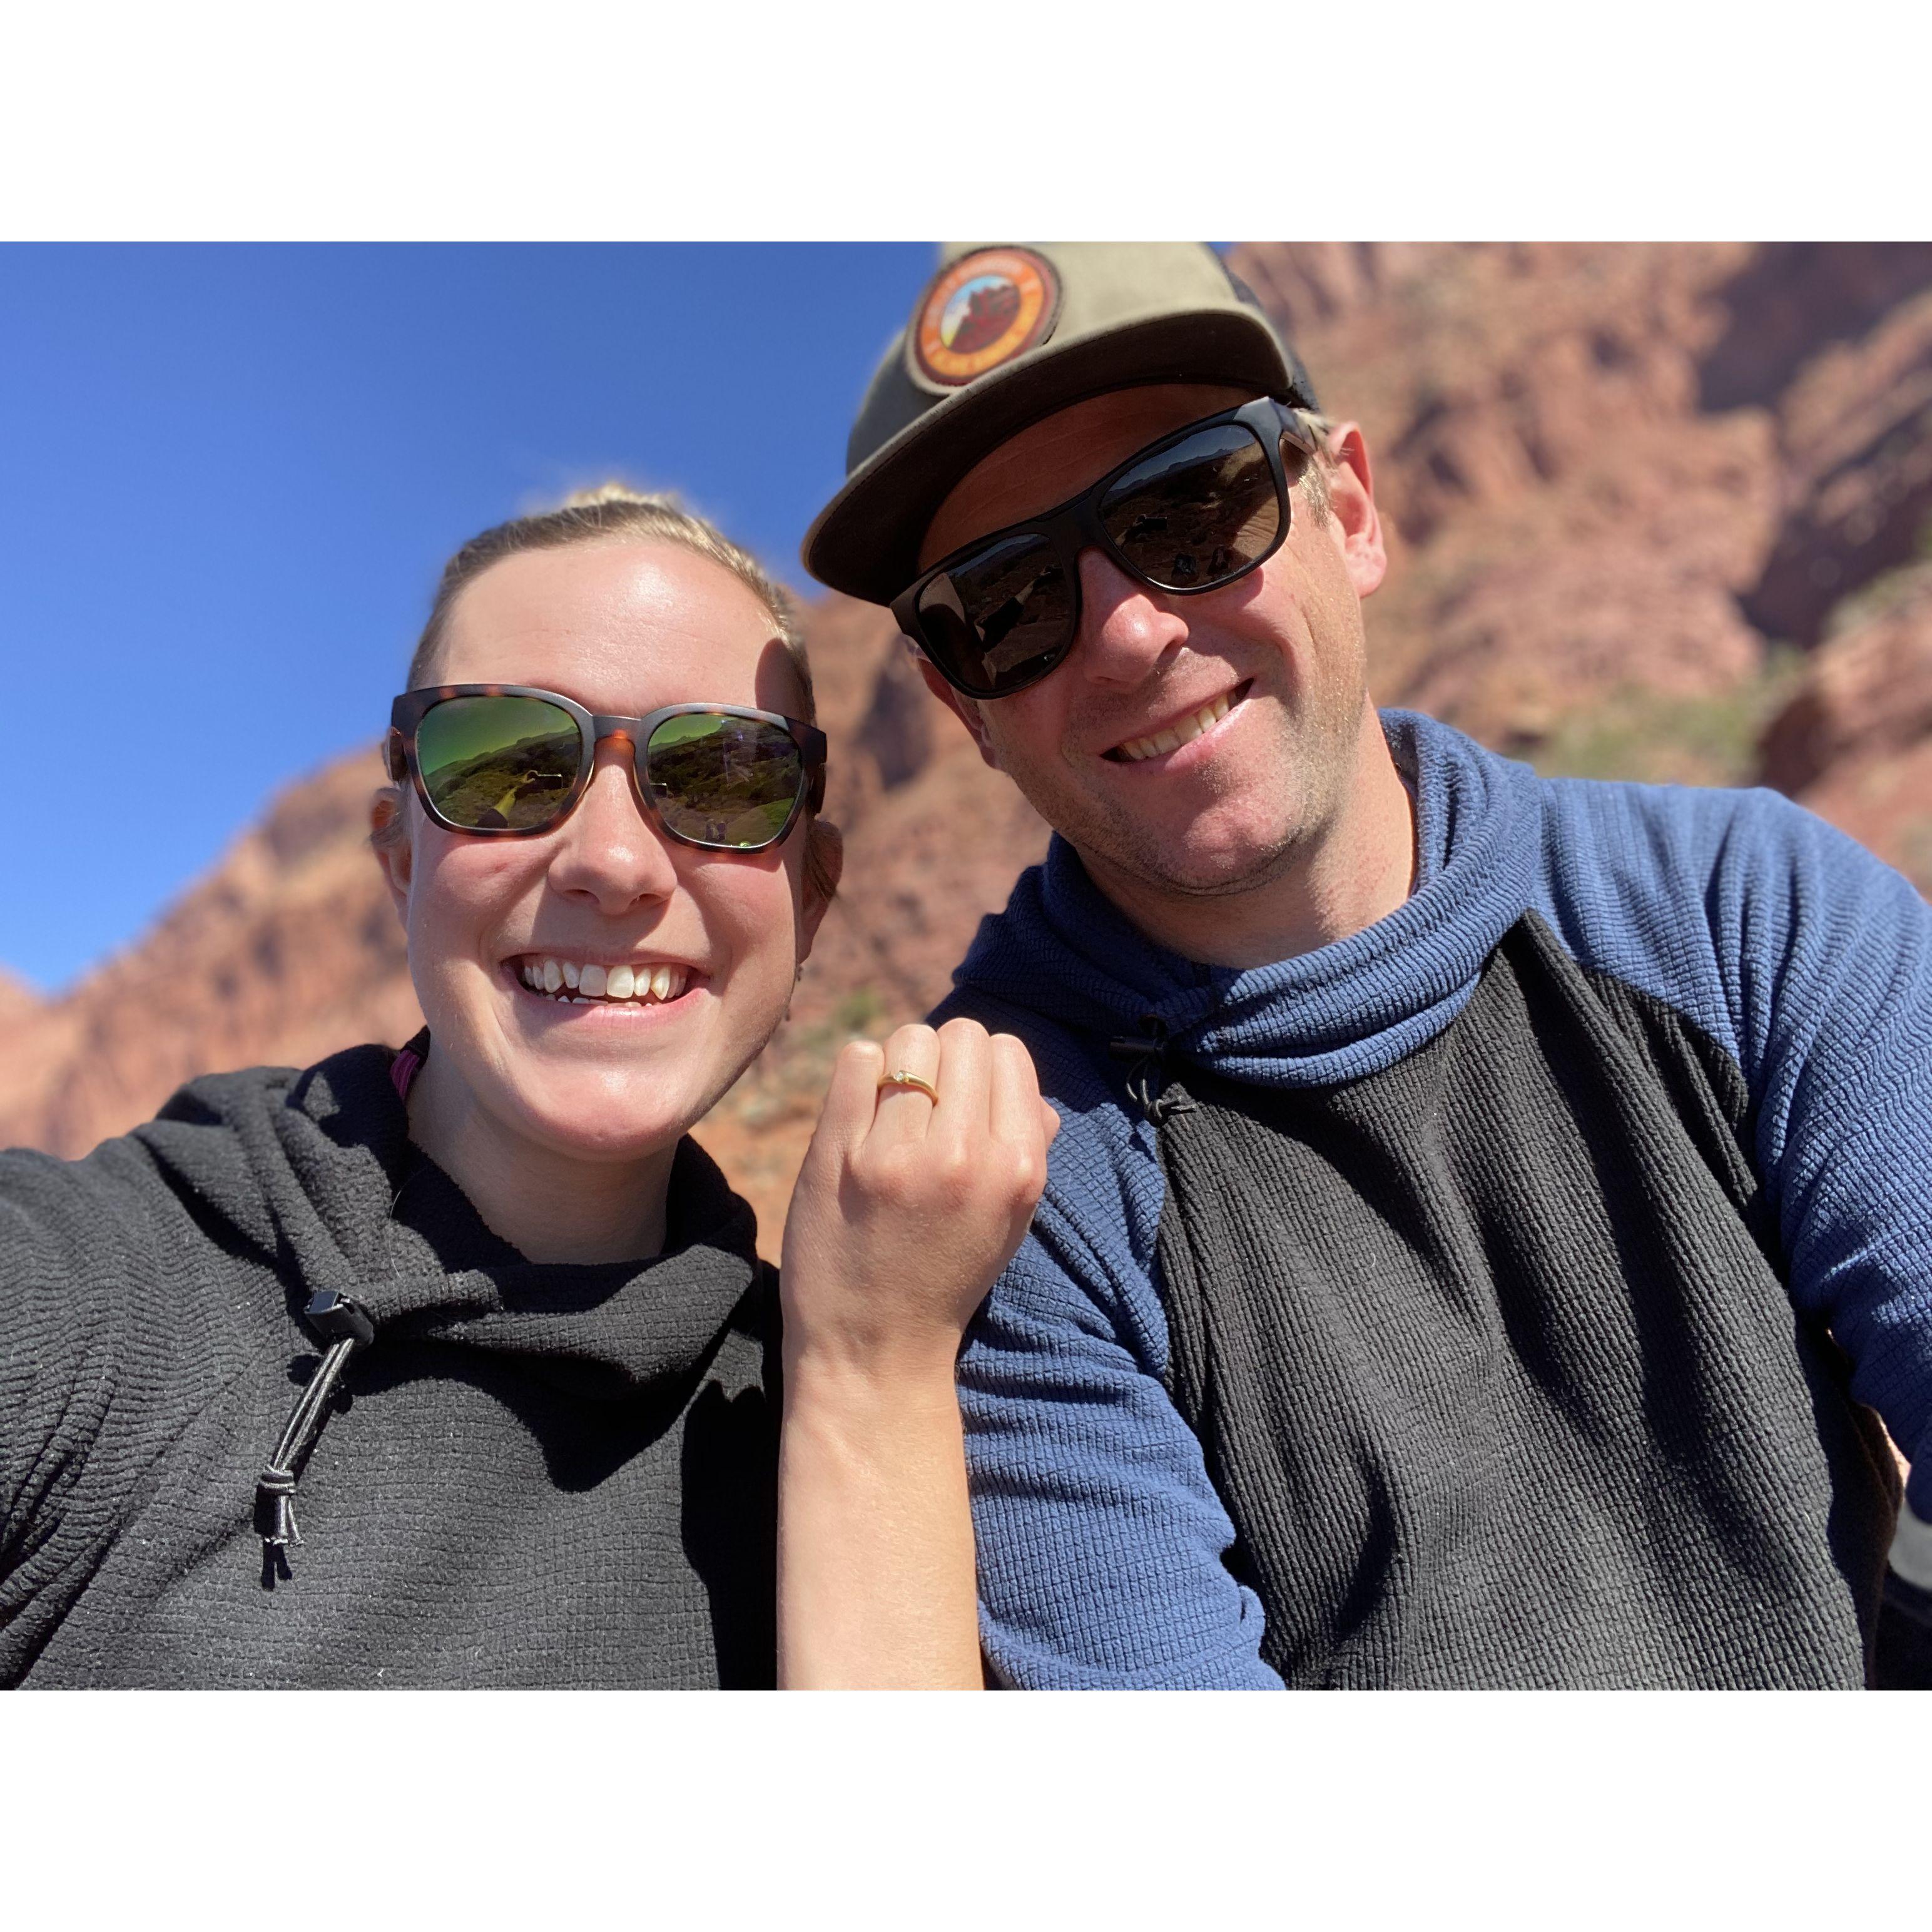 Engaged: October 29, 2020